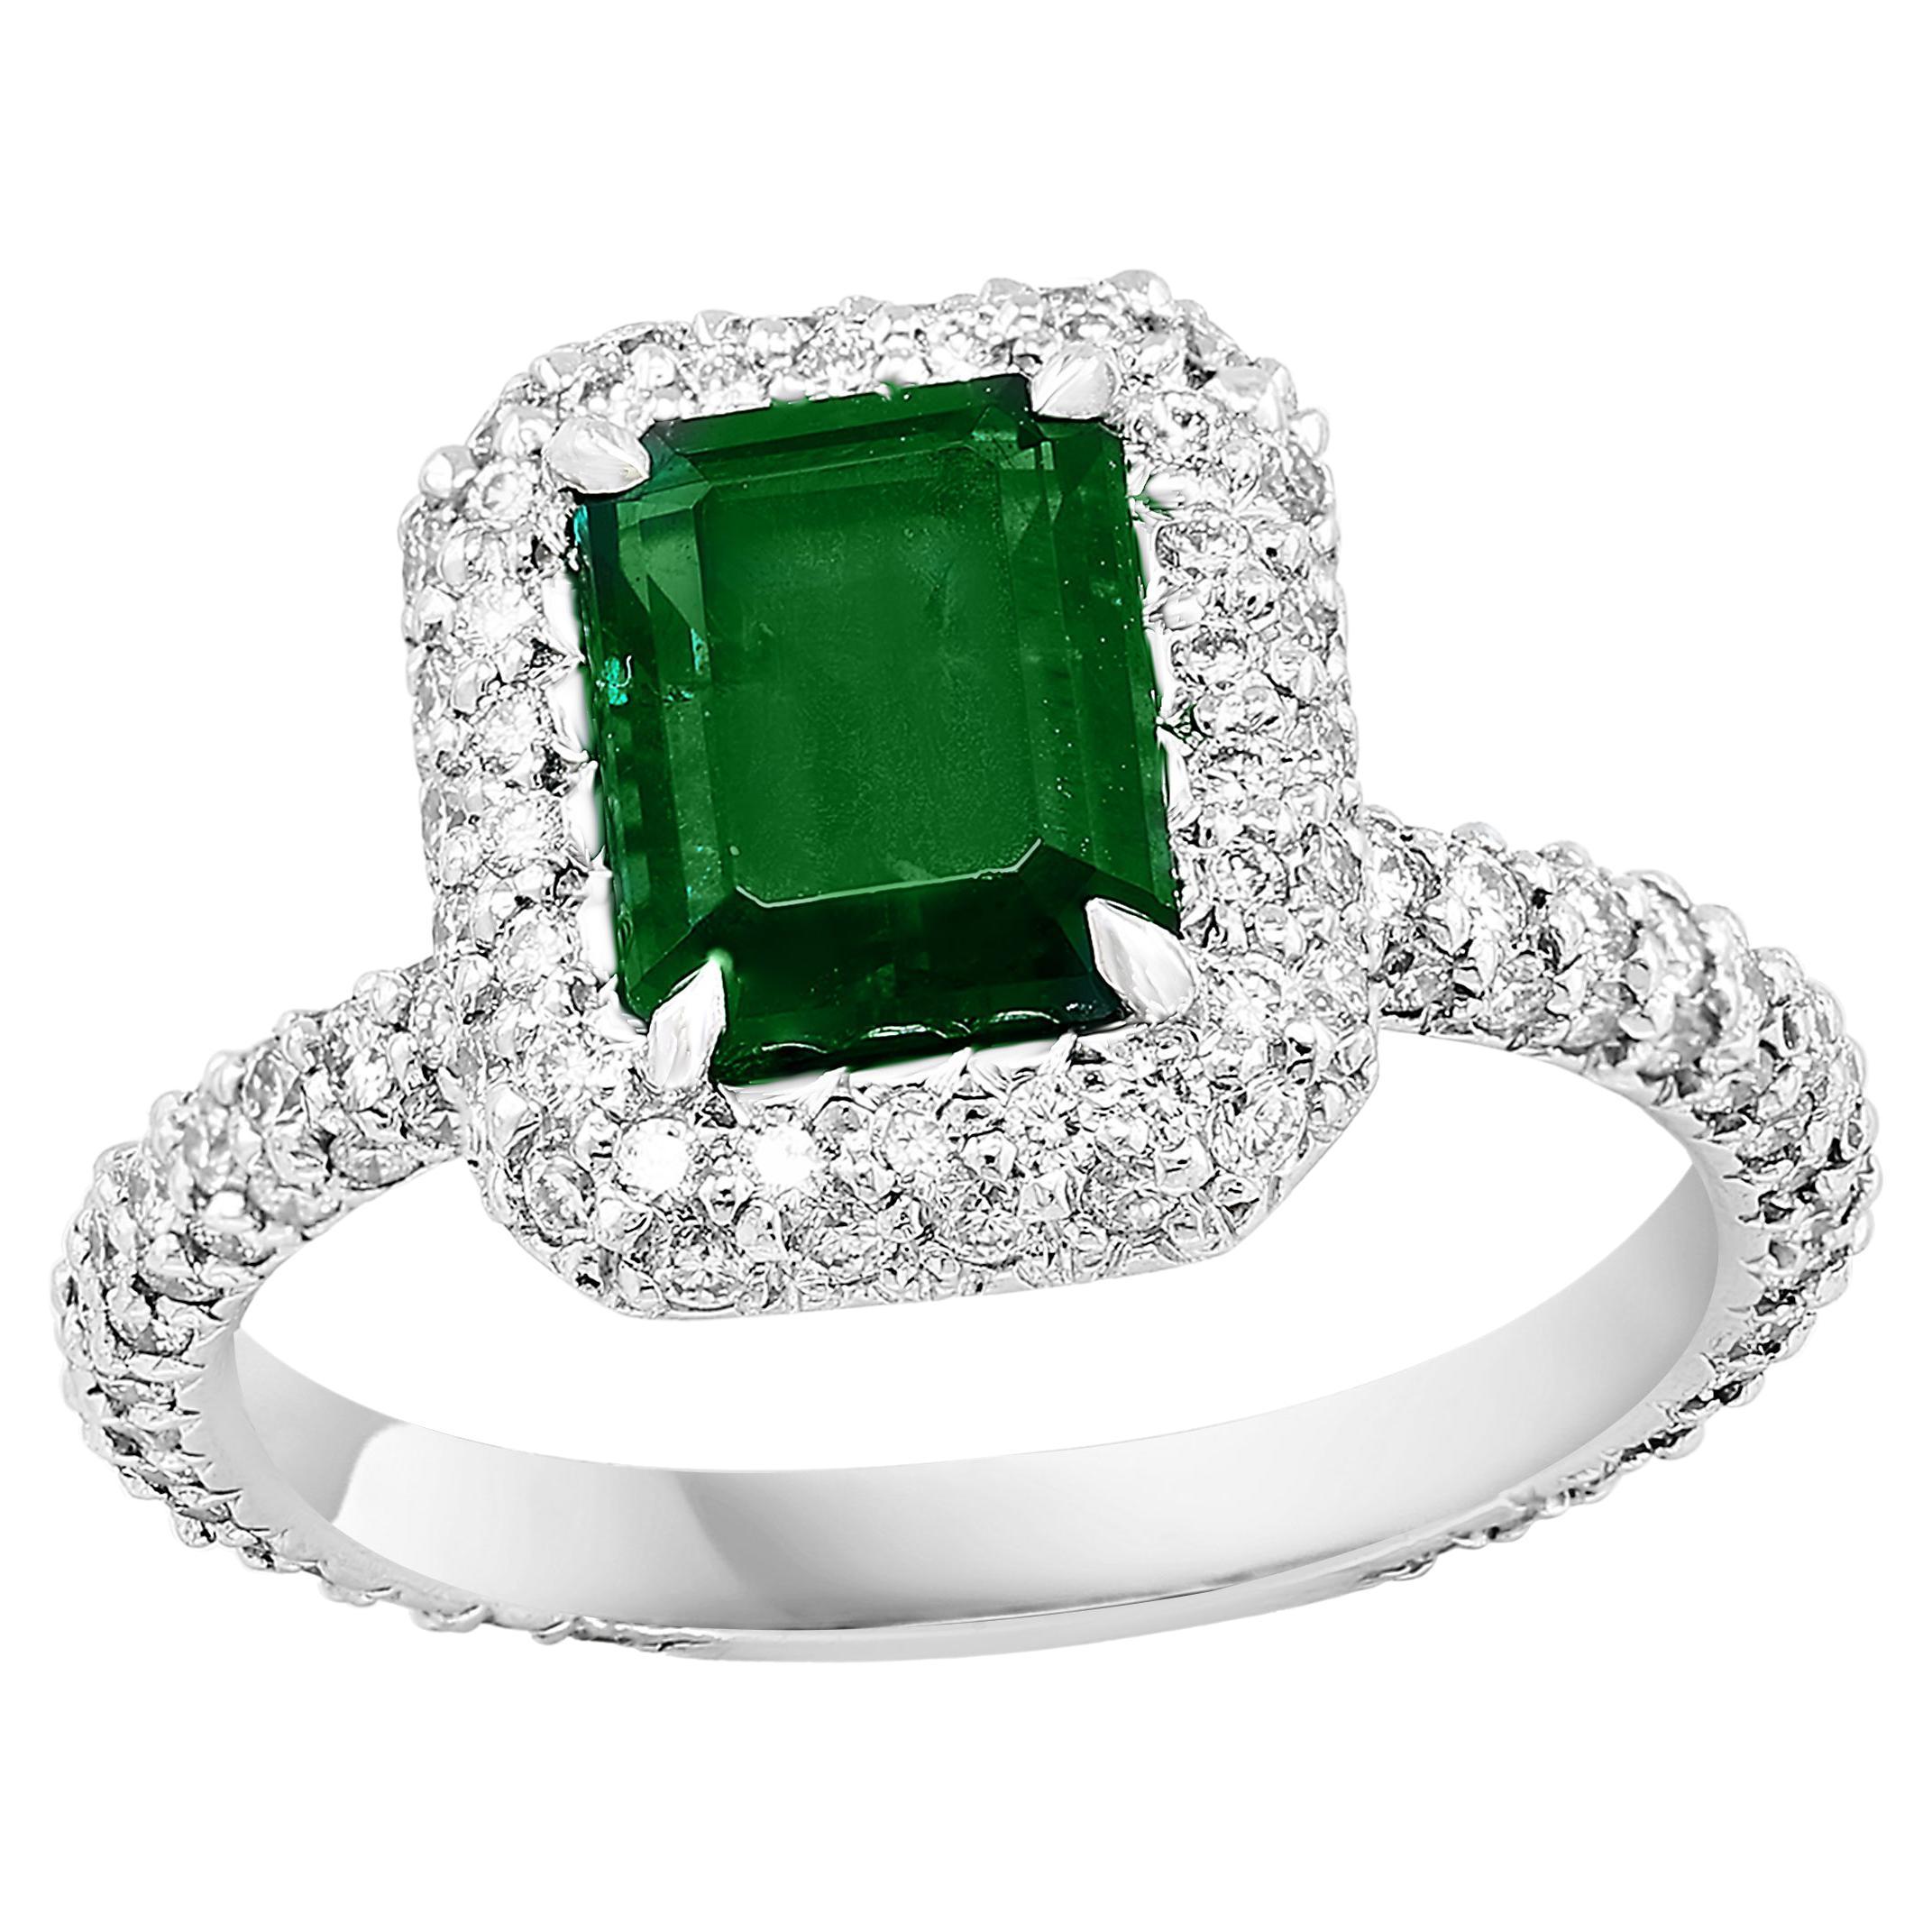 1.60 Carat Emerald Cut Emerald and Diamond Engagement Ring in Platinum For Sale